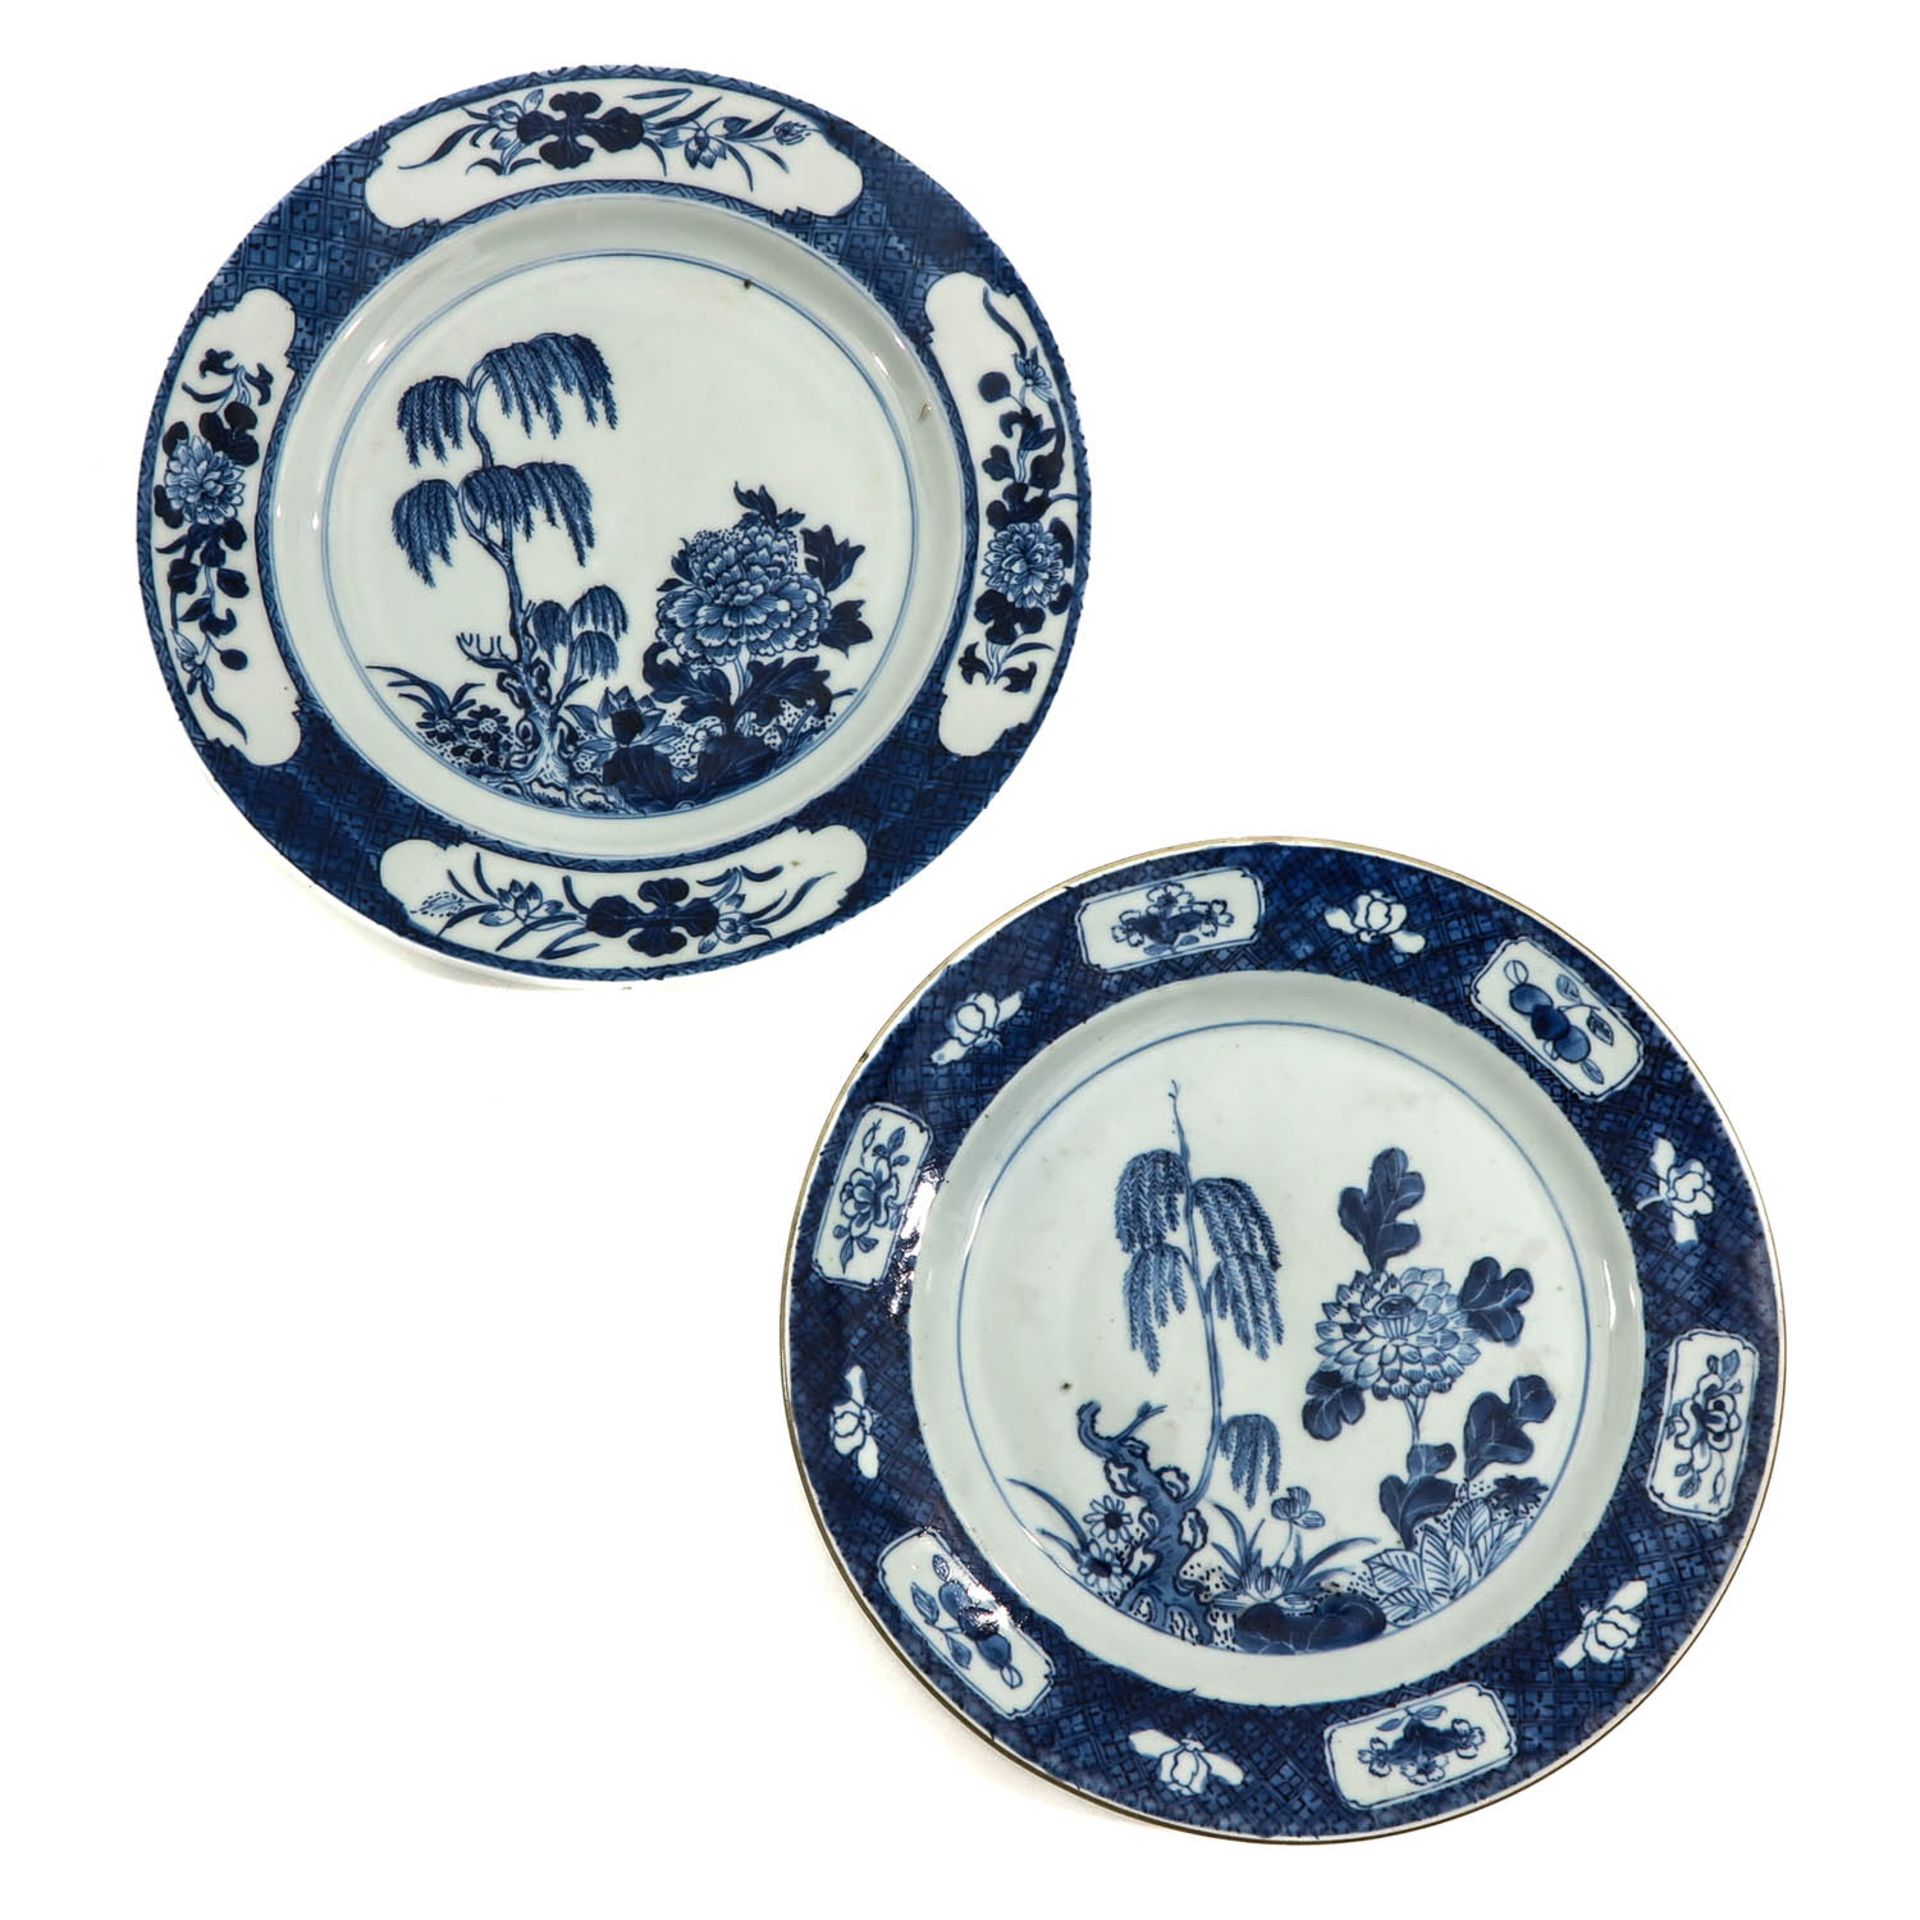 A Series of 4 Blue and White Plates - Bild 3 aus 9